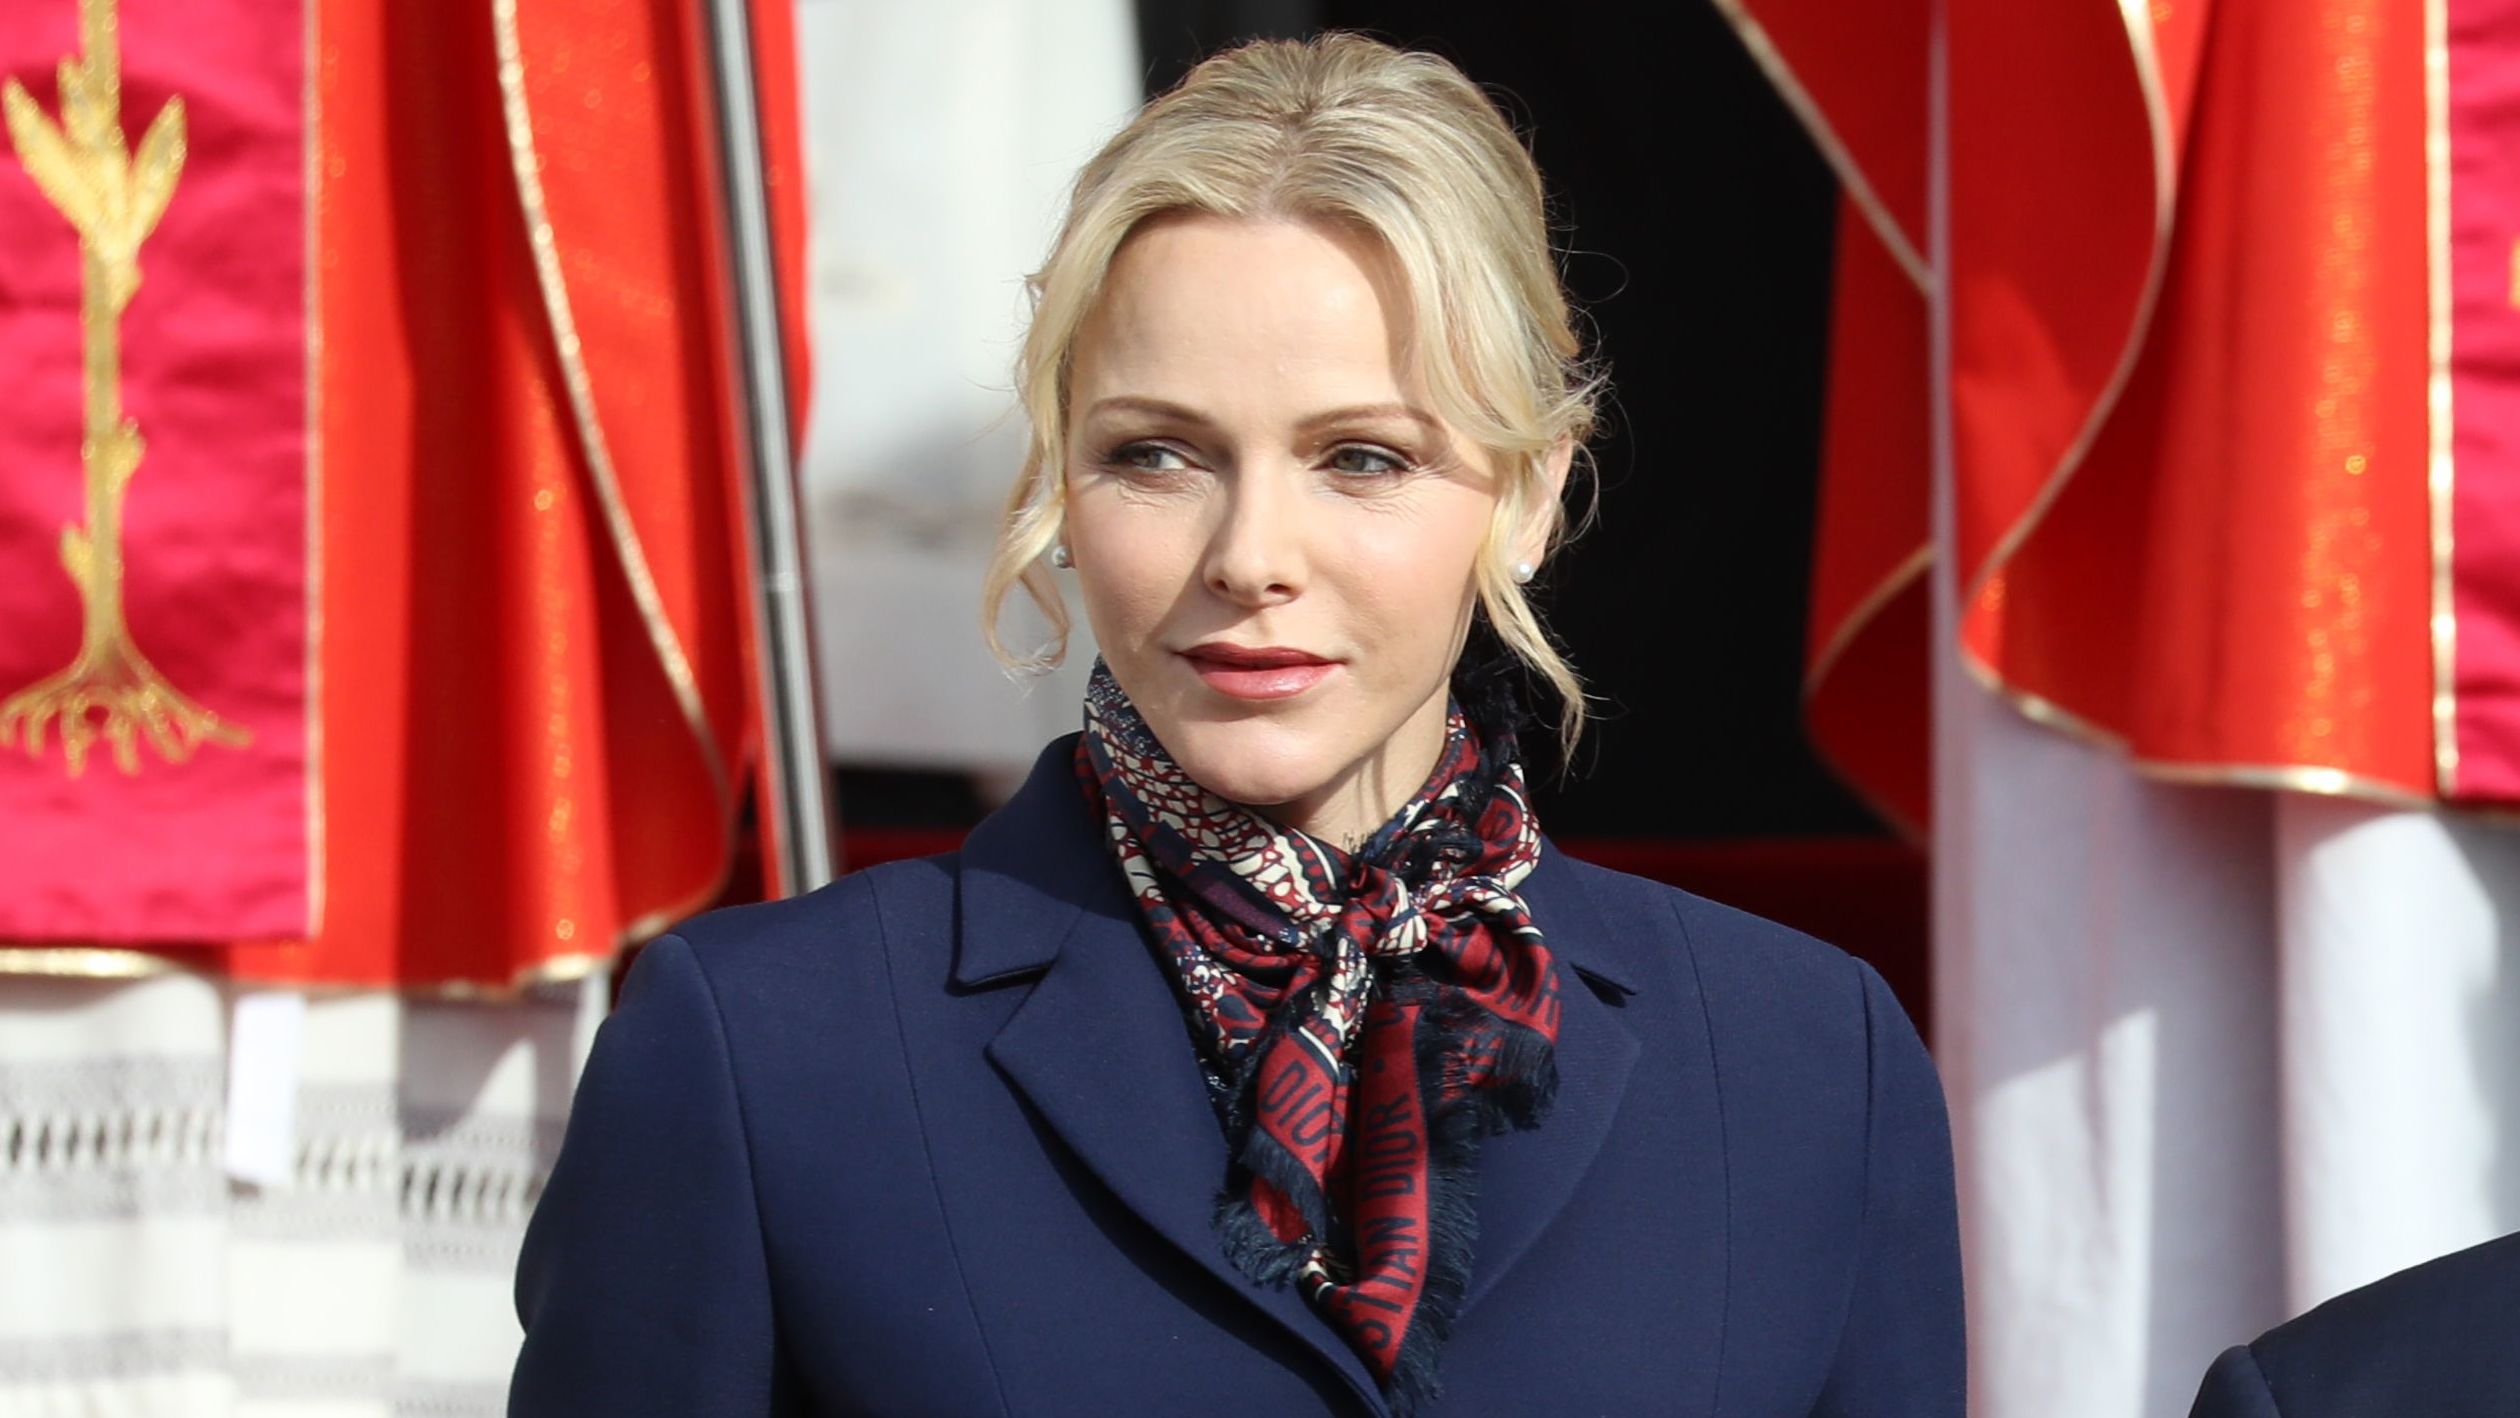 Princess Charlene of Monaco, pictured in January 2020, spent much of the year in her native South Africa recovering from an ear, nose and throat infection and subsequent procedures to treat it. 